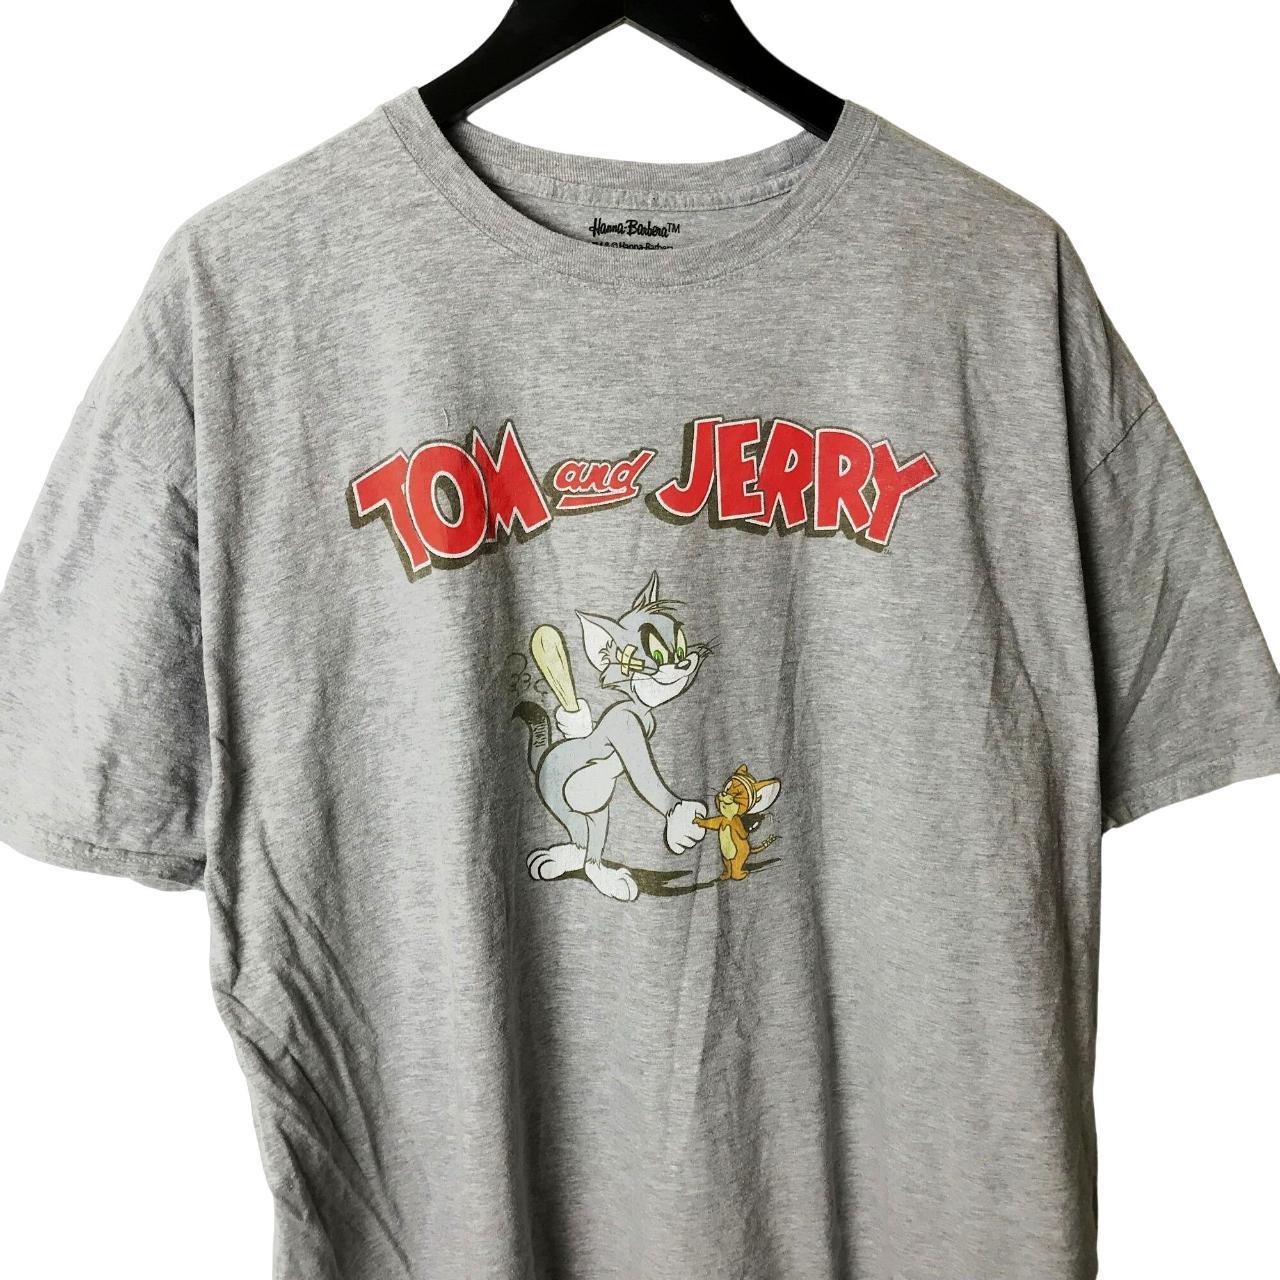 Tom And Jerry T Graphic Shirt Depop Tee... Cartoon Characters 